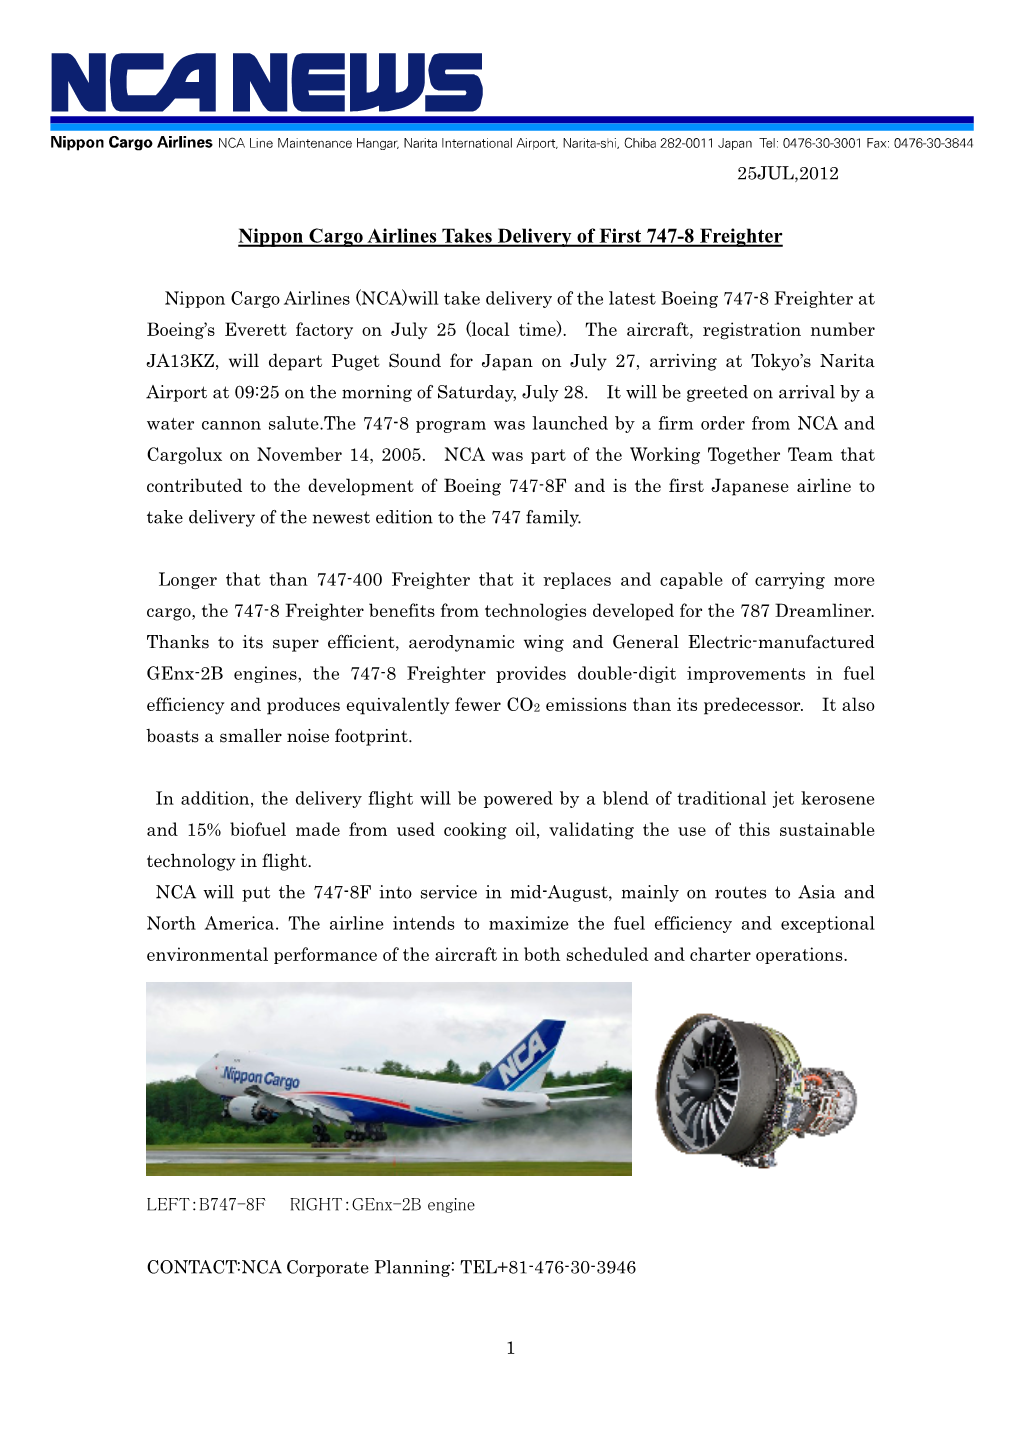 Nippon Cargo Airlines Takes Delivery of First 747-8 Freighter